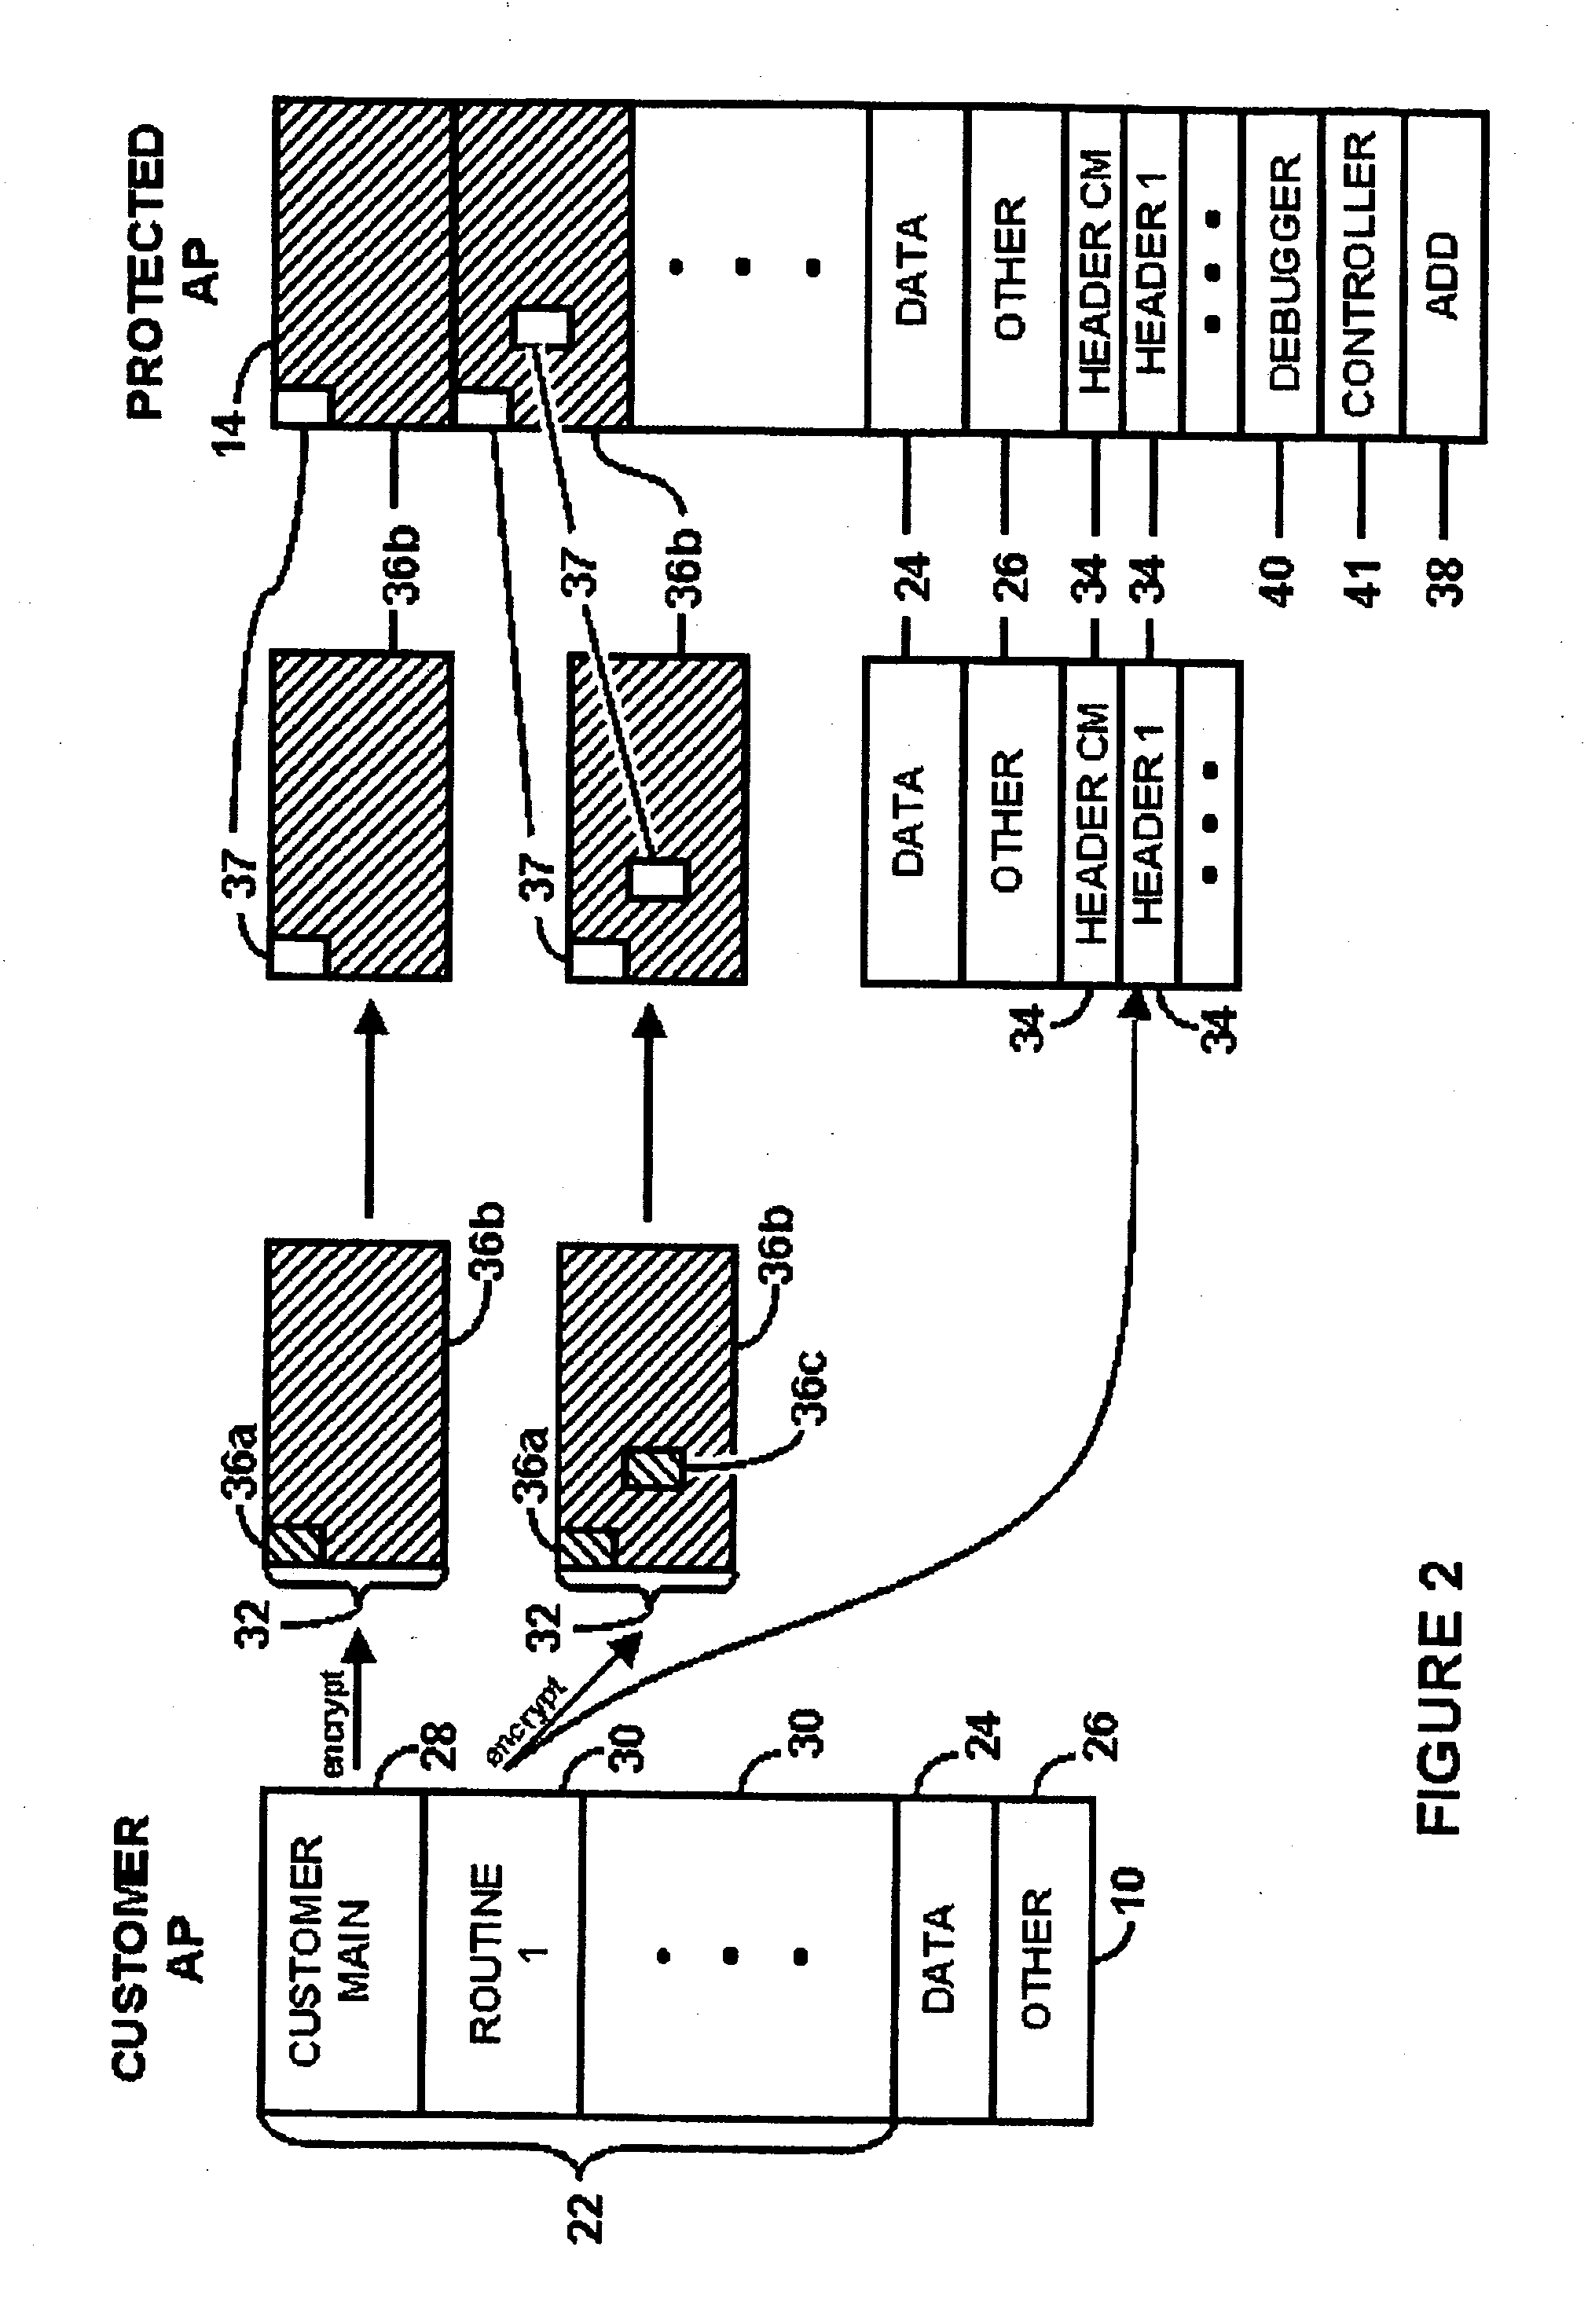 Systems And Methods For Regulating Execution Of Computer Software